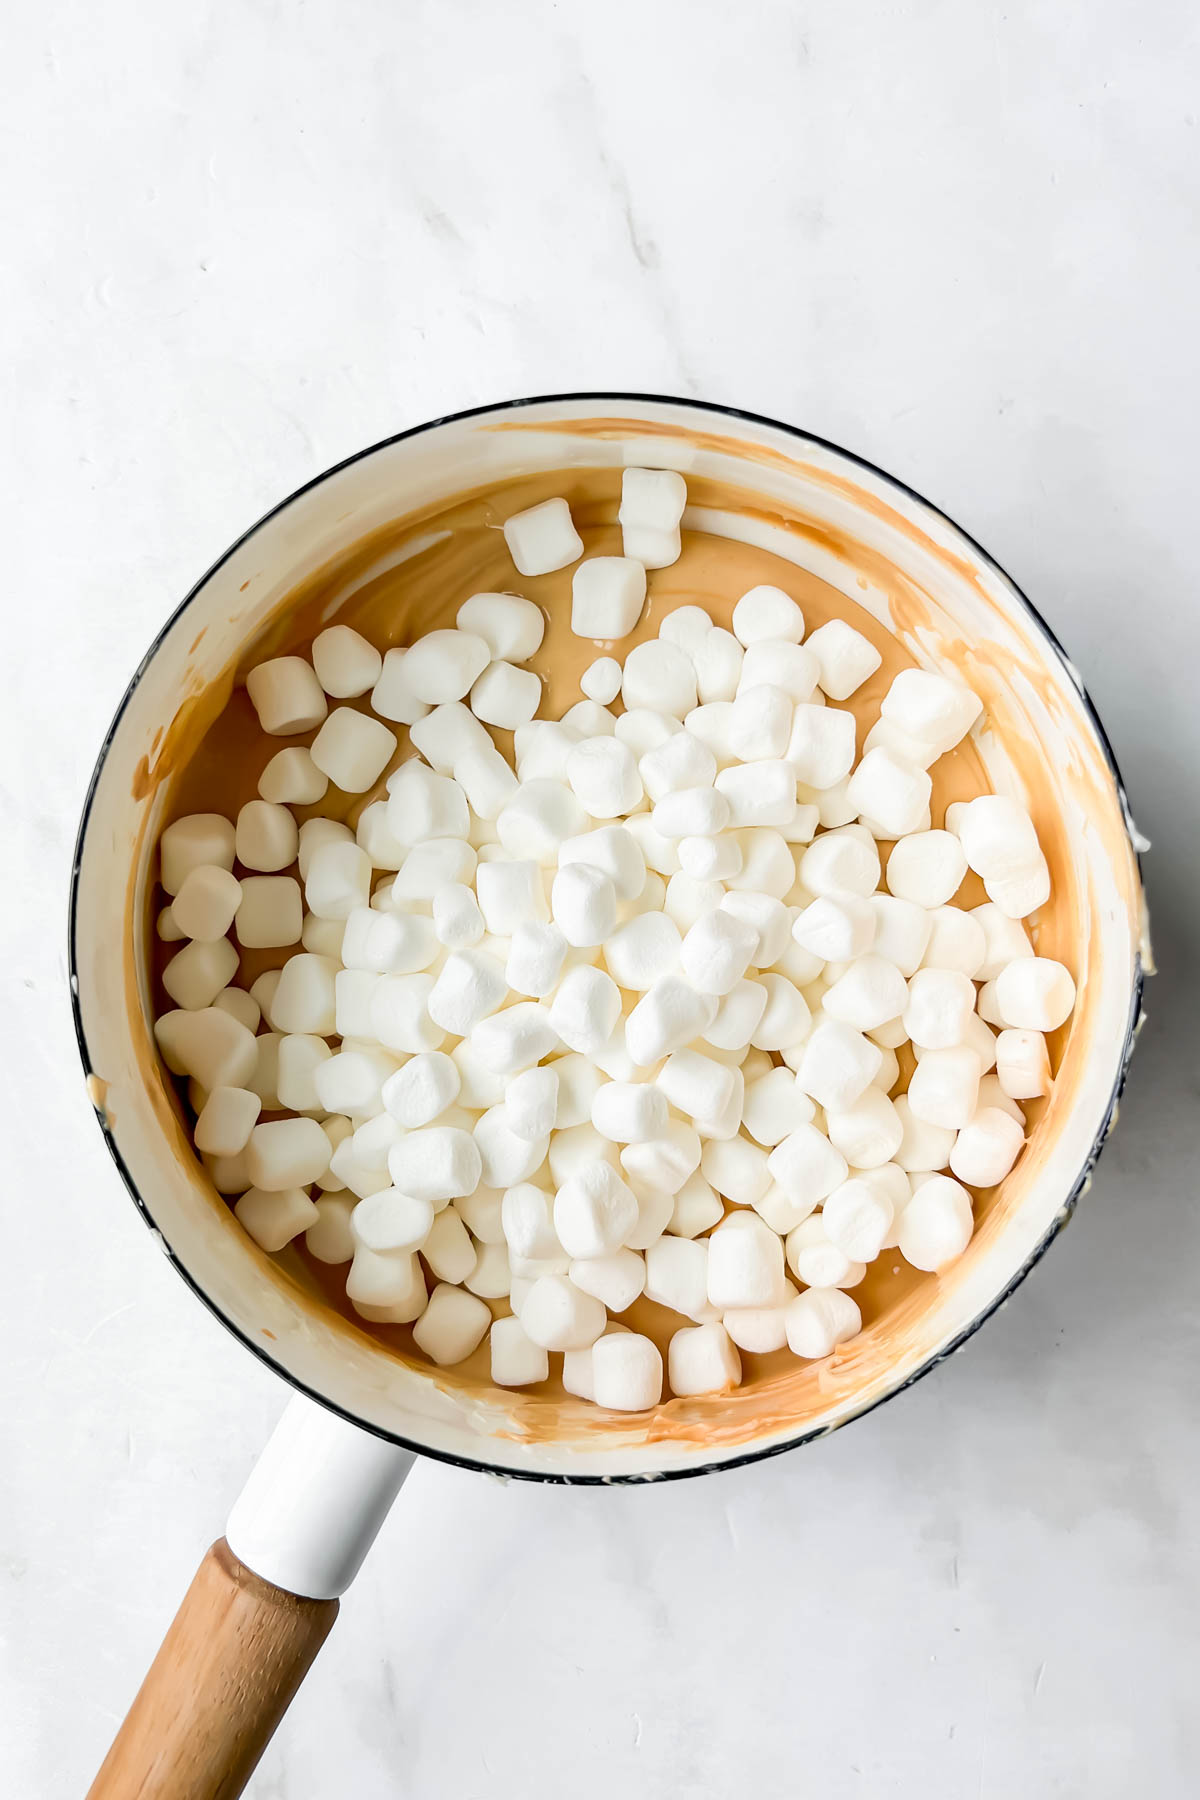 mini marshmallows poured in on top of melted peanut butter and white chocolate. 